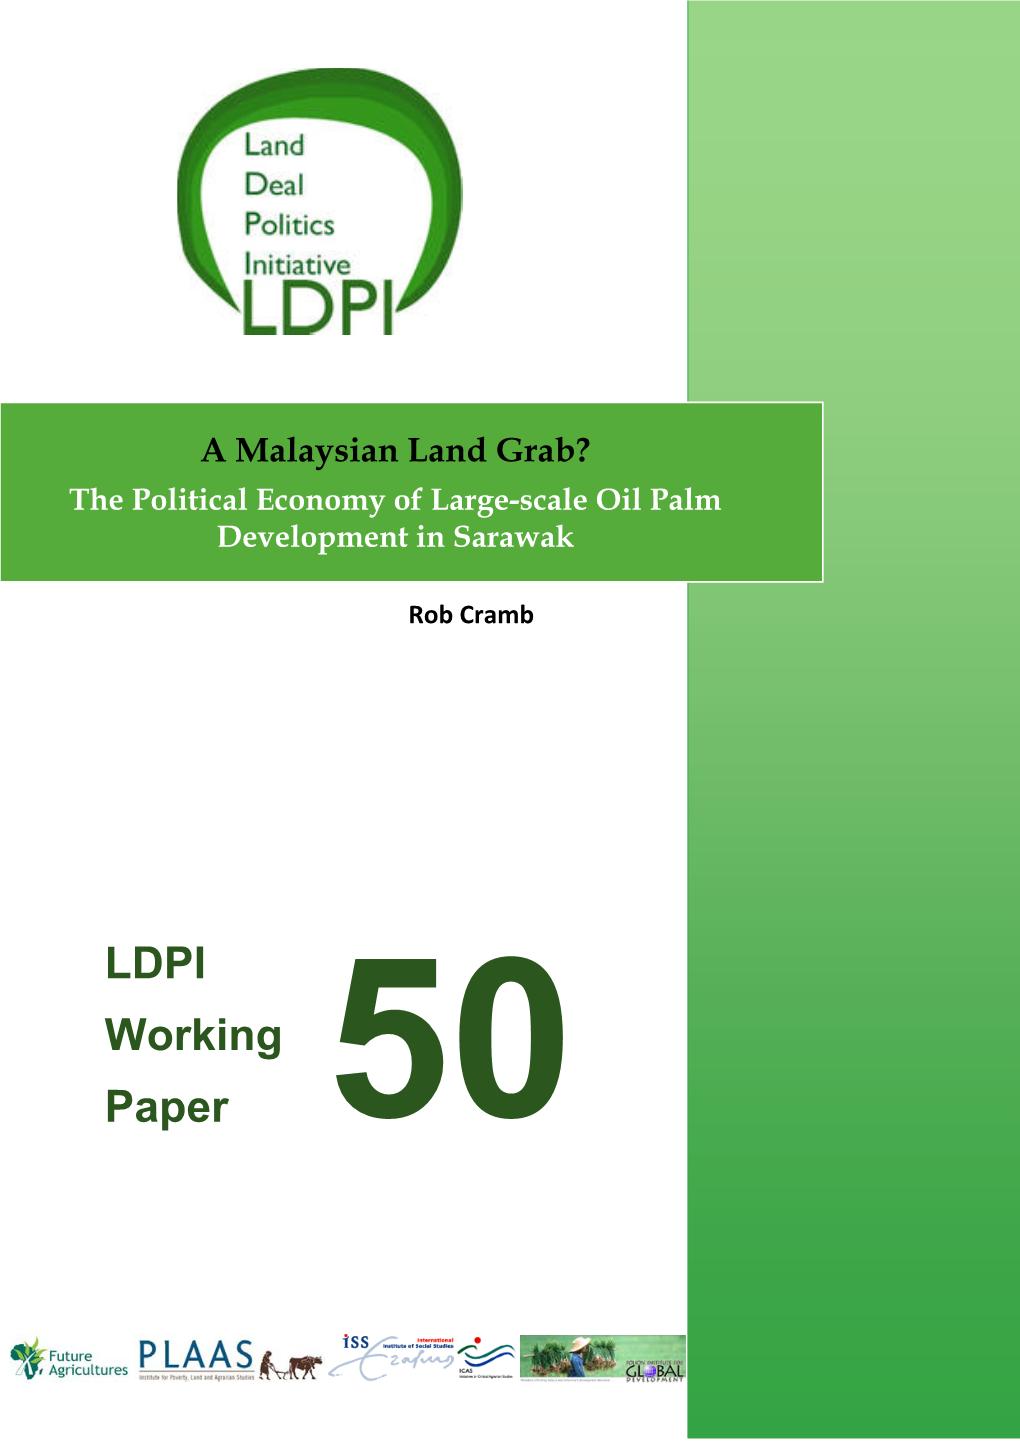 A Malaysian Land Grab? the Political Economy of Large-Scale Oil Palm Development in Sarawak